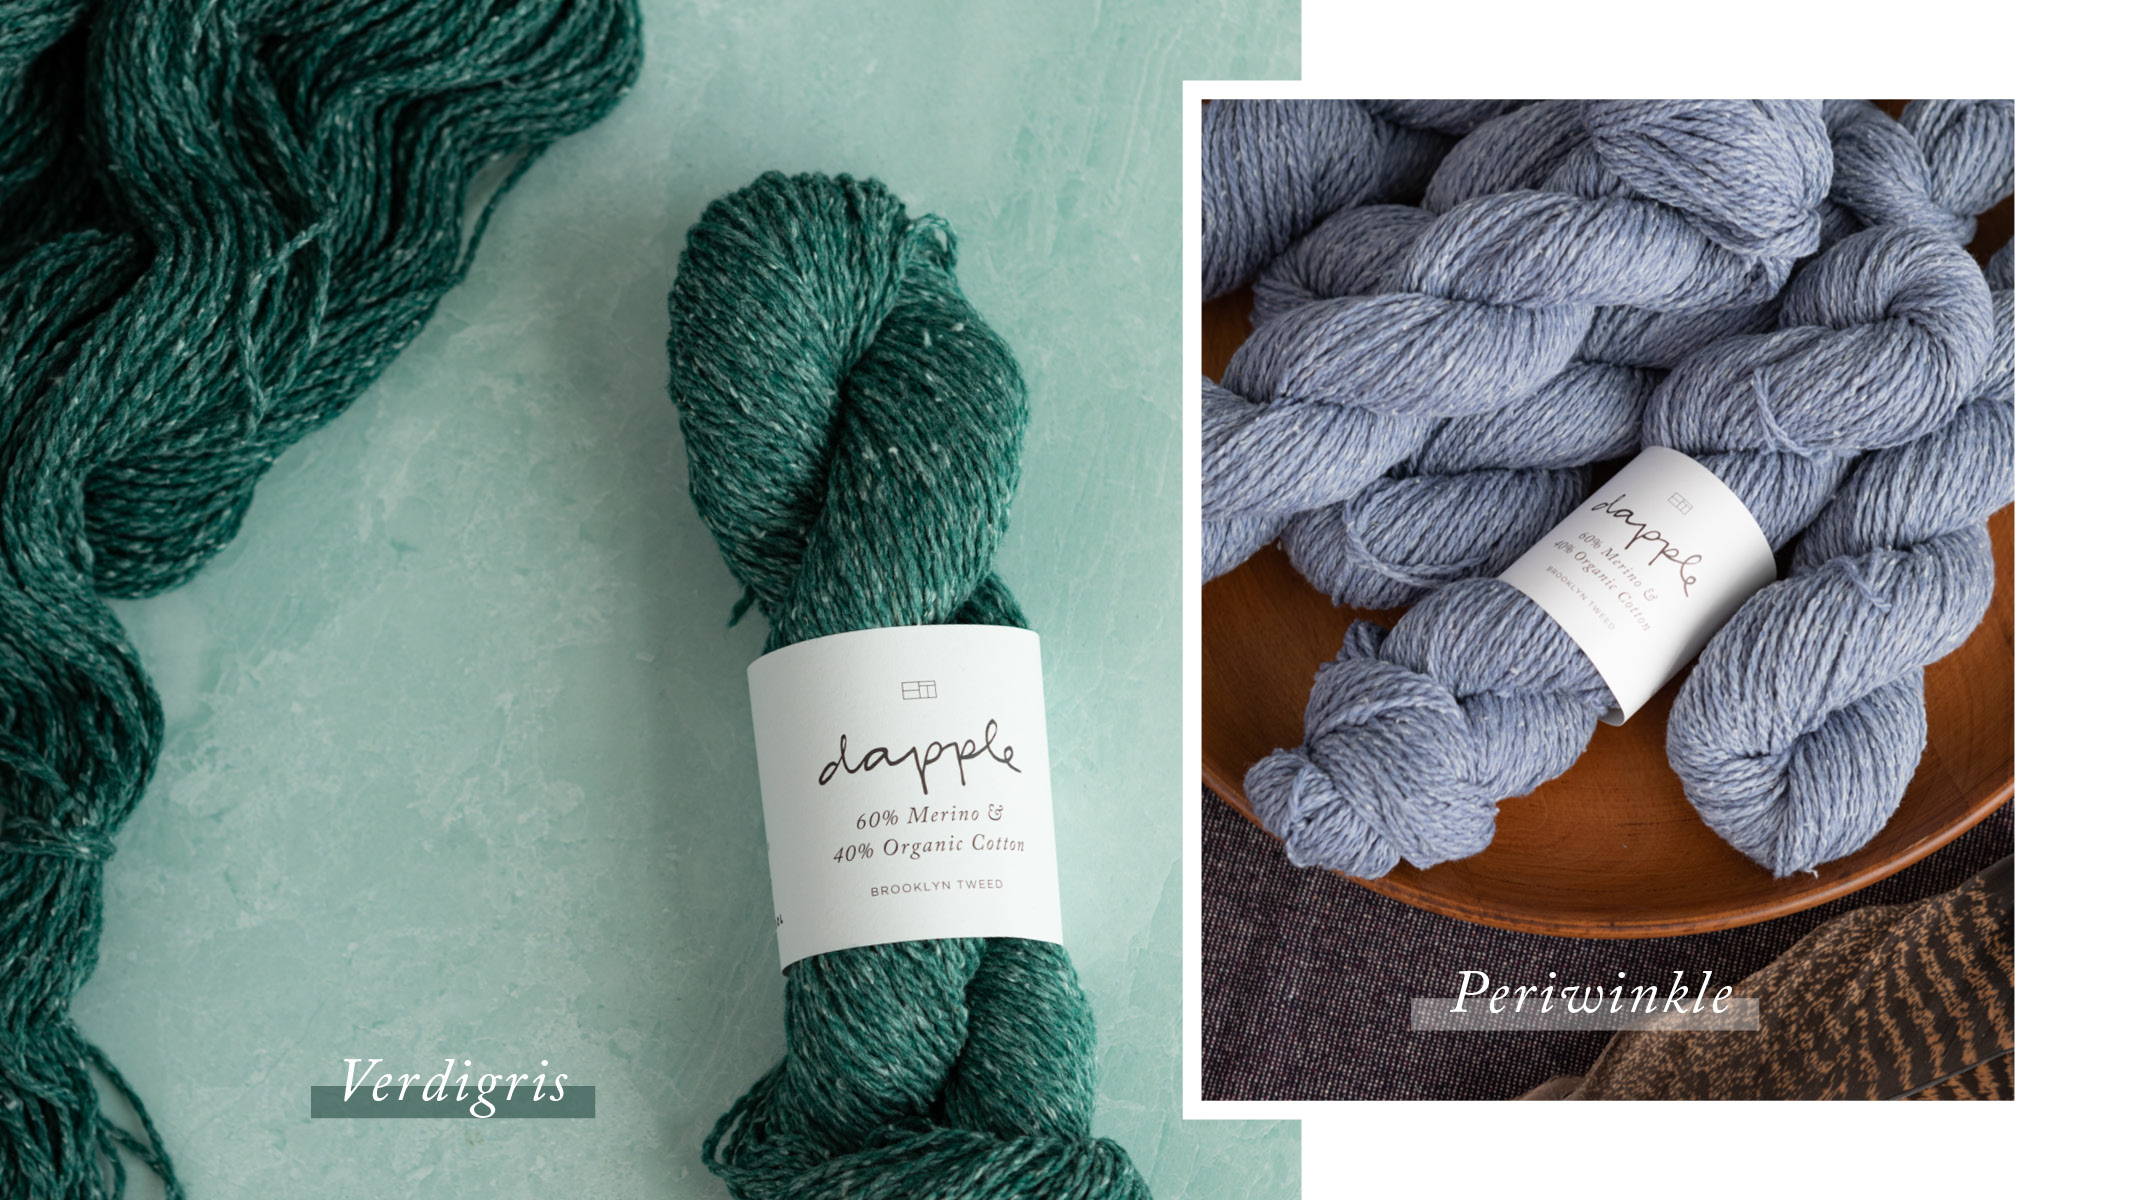 Right: A pile of 6-7 skeins of Dapple Periwinkle sitting on a wooden plate. Left: Single skein of Dapple Verdigris with label next to waves of loose yarn in the same colorway.